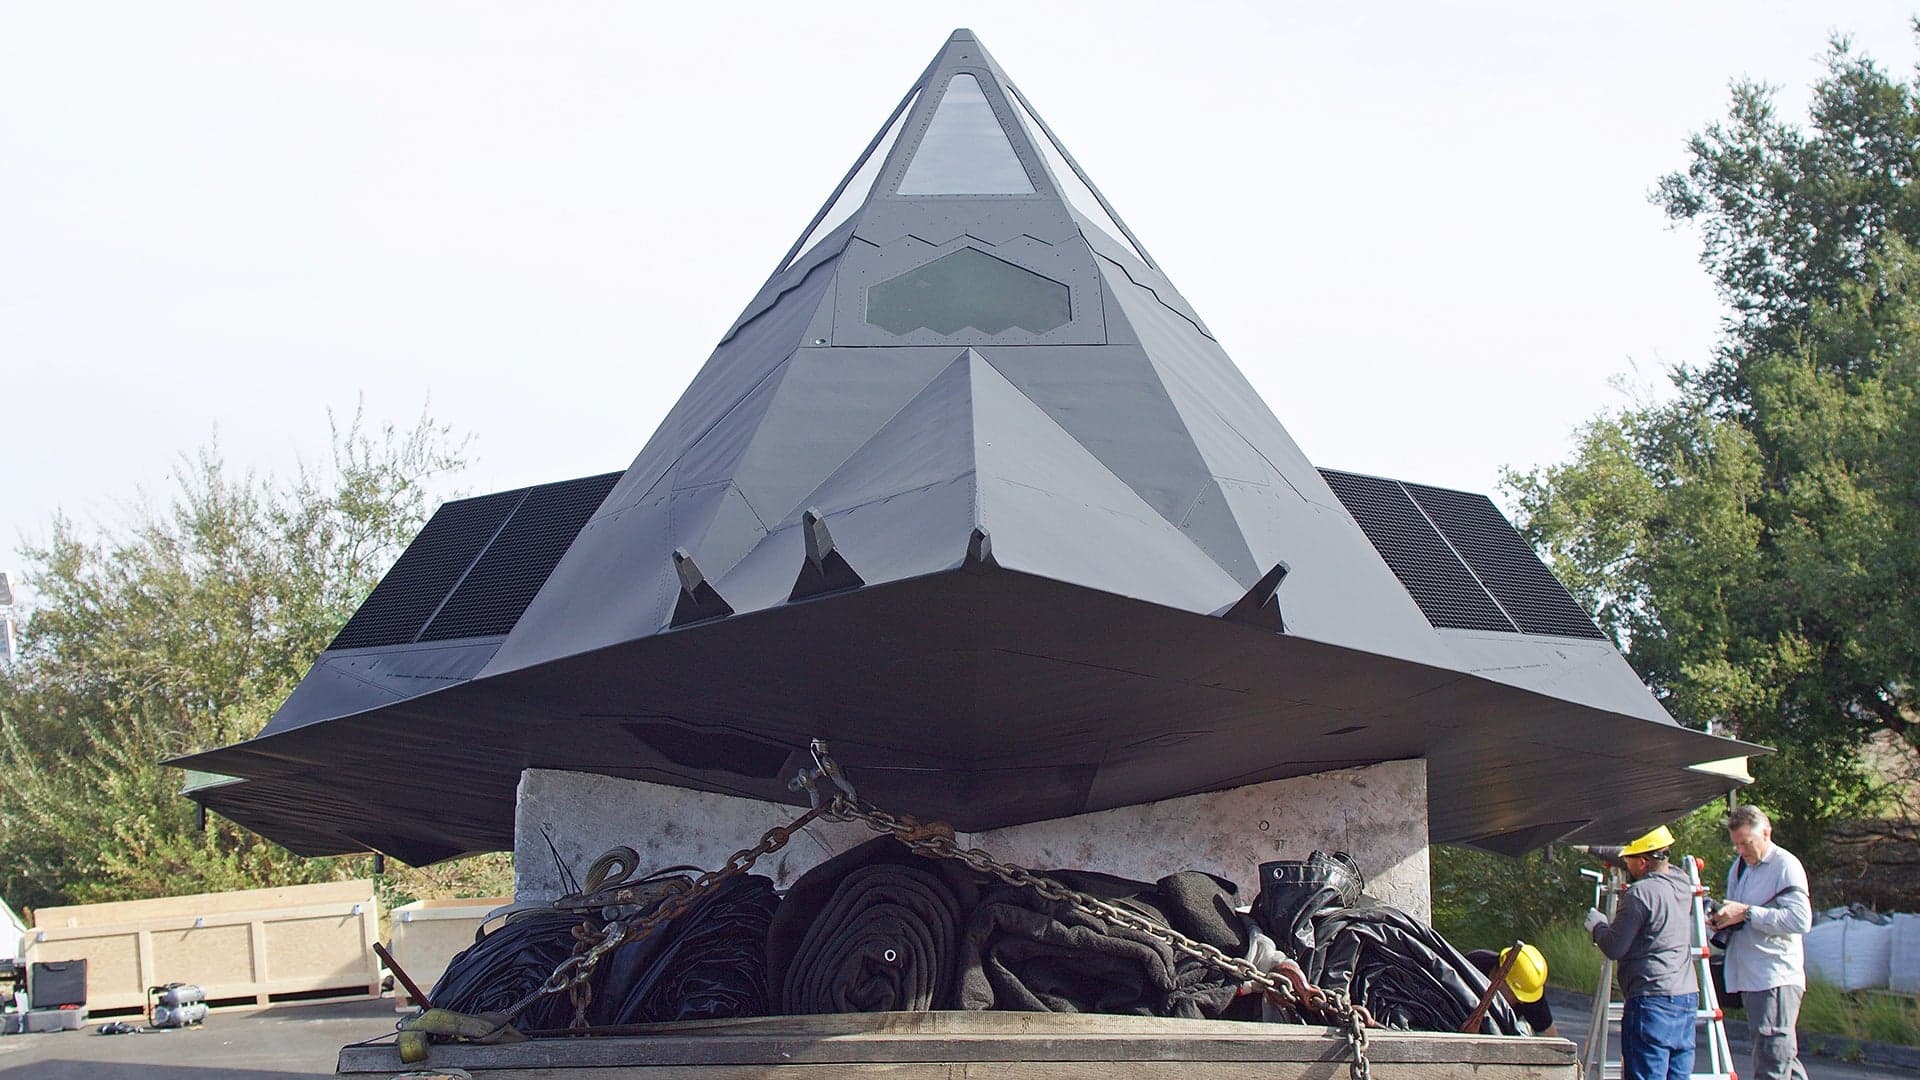 Check Out These Exclusive Shots Of An F-117 Stealth Jet Arriving At The Reagan Library